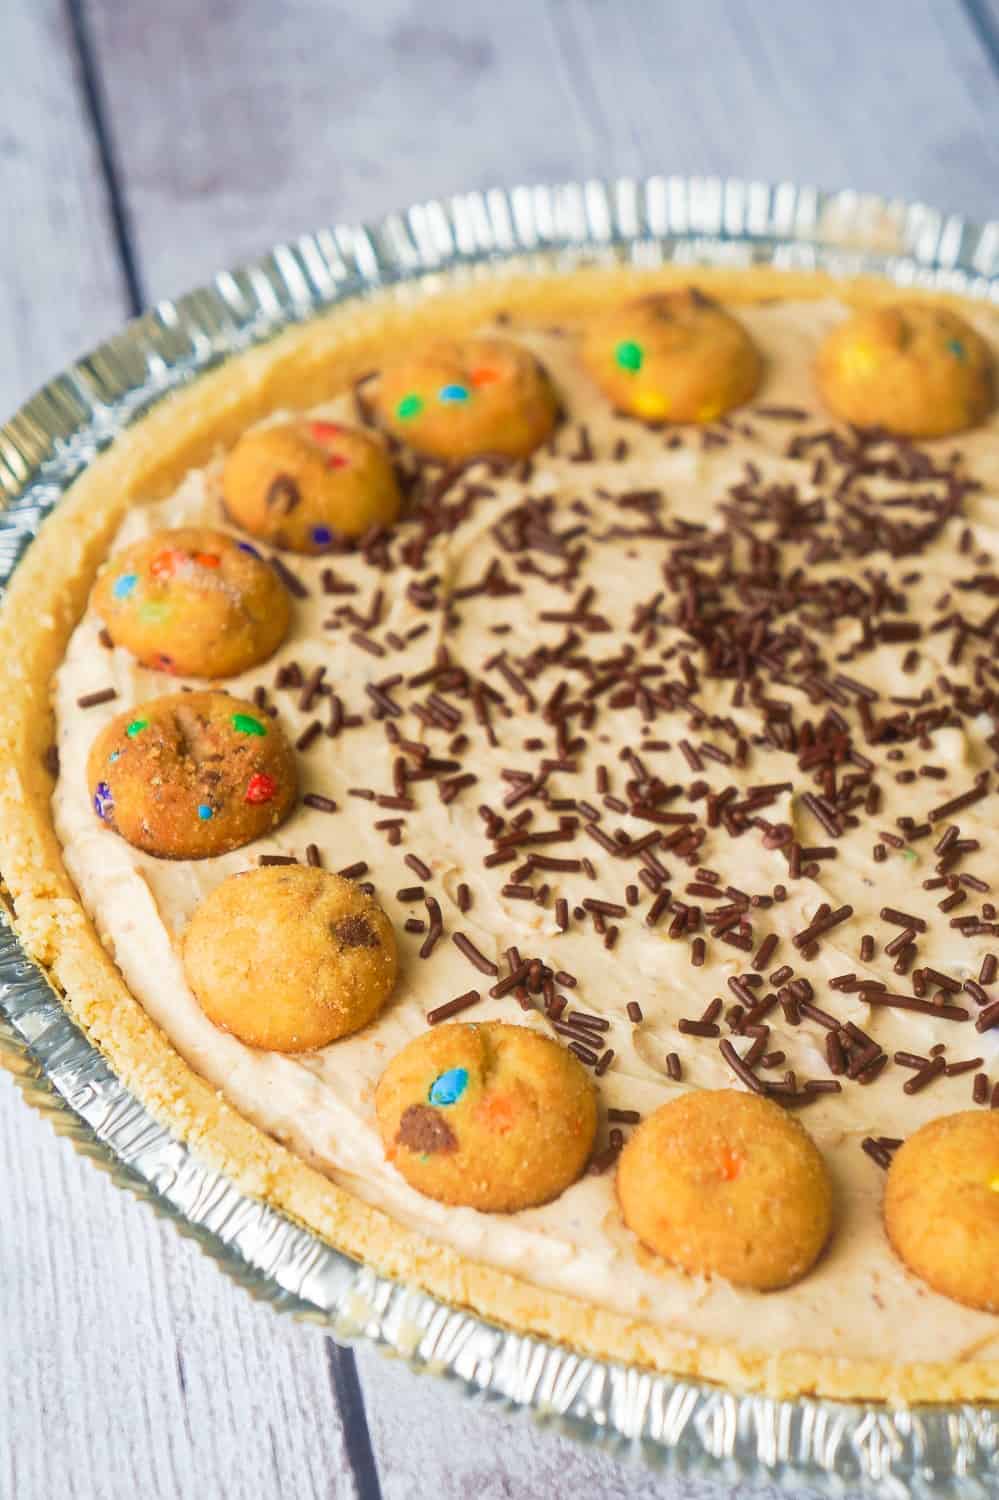 Rainbow Chip Cookie No Bake Cheesecake is an easy no bake pie recipe perfect for spring and summer. This tasty dessert is made in a shortbread pie crust and loaded with crushed Rainbow Chips Ahoy Cookies.